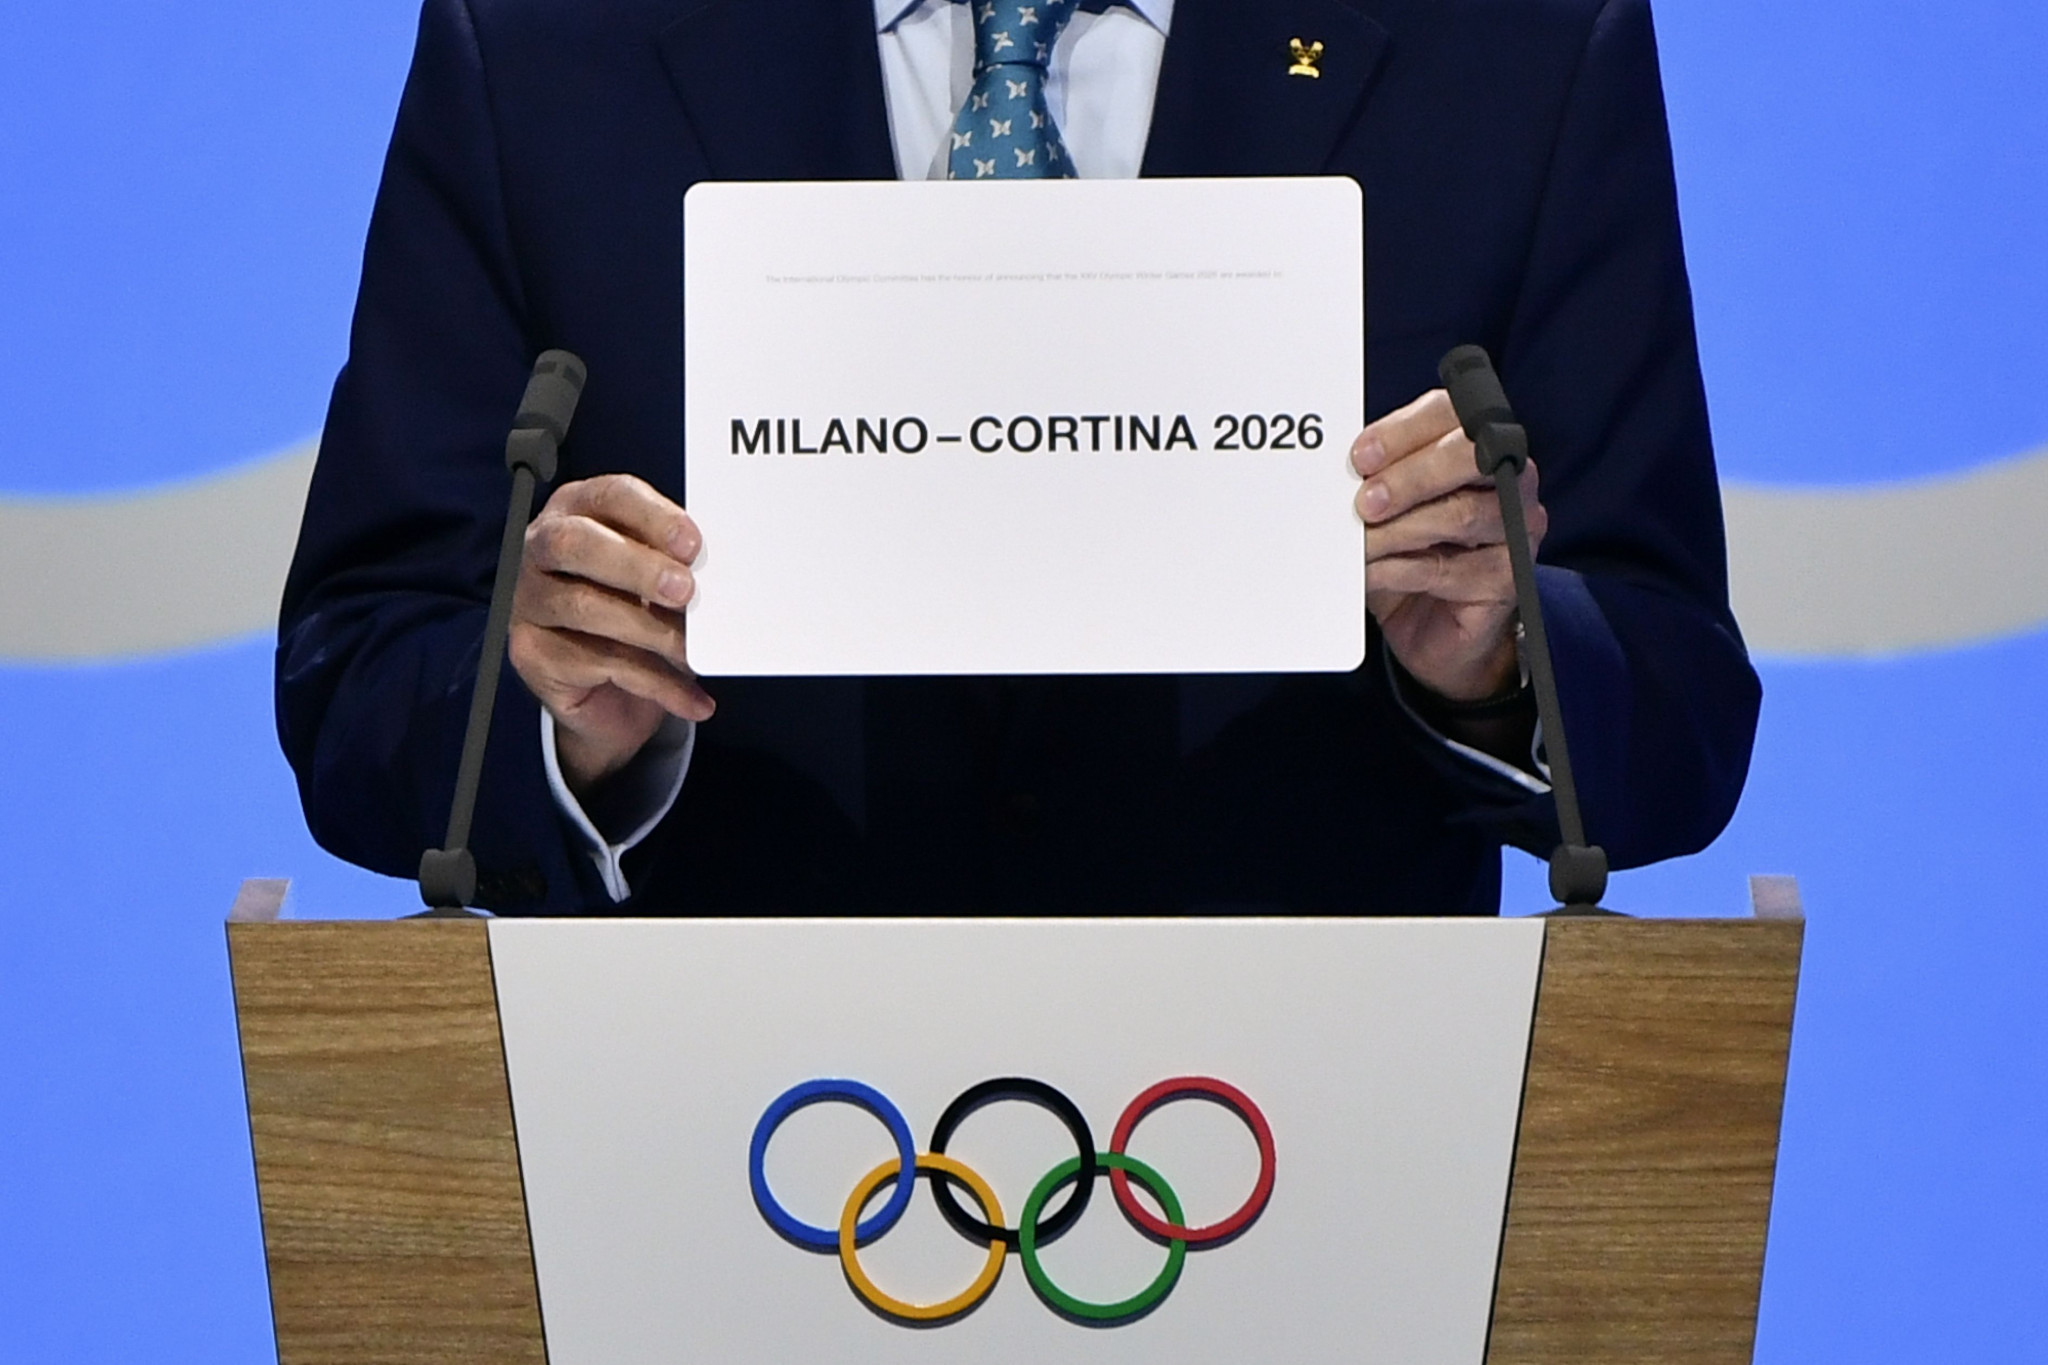 Milan Cortina was awarded the 2026 Winter Olympic and Paralympic Games in June 2019 ©Getty Images